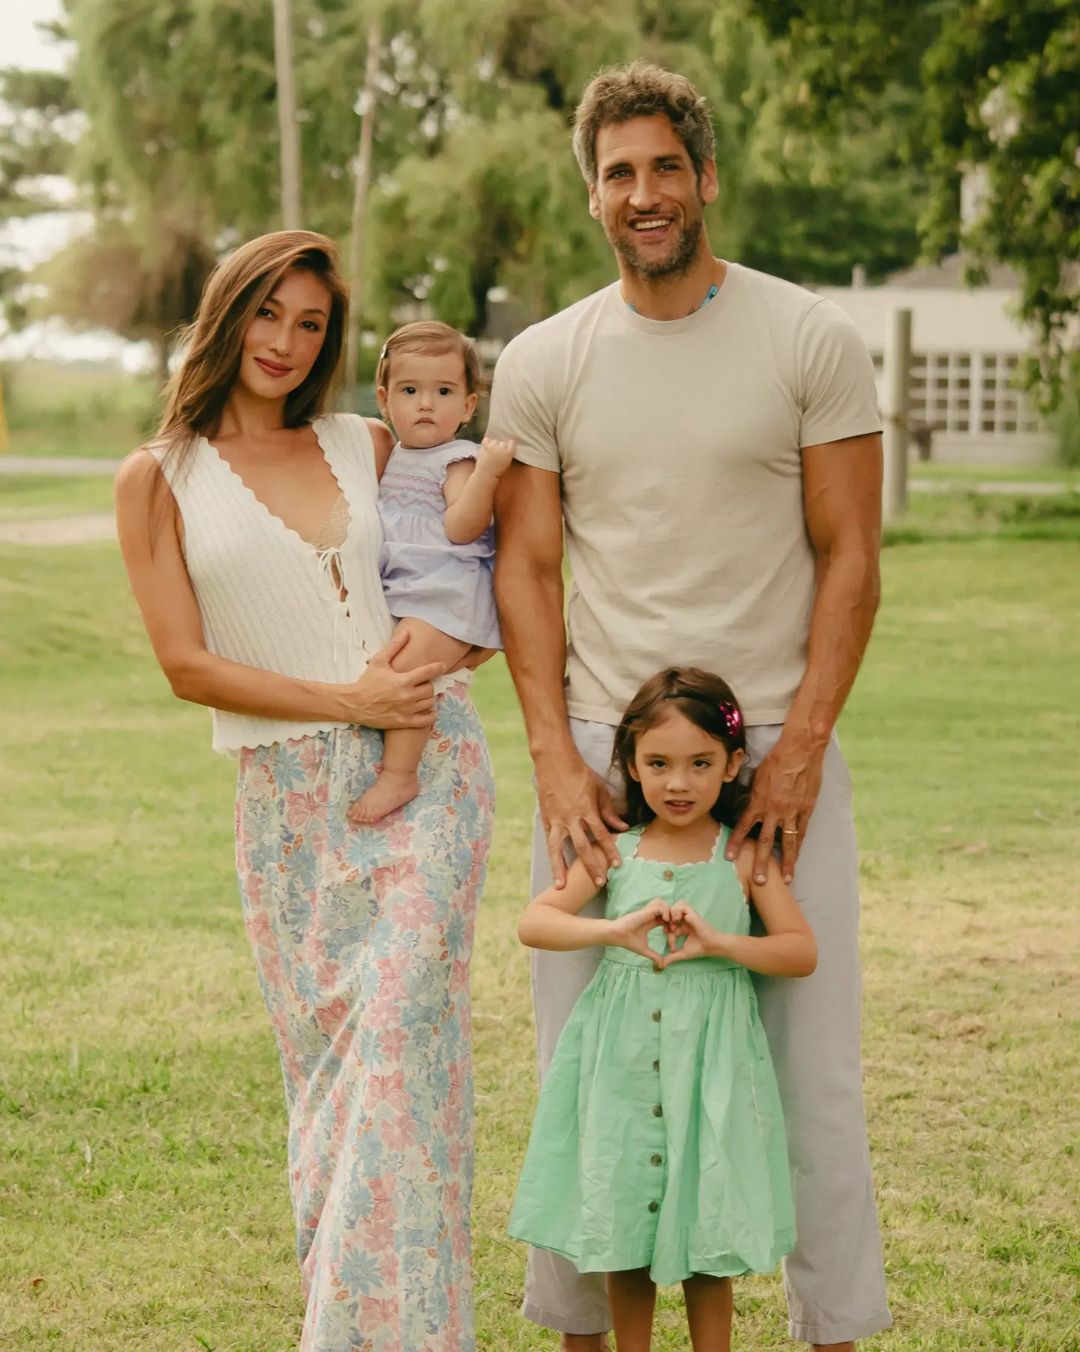 Solenn Heussaff and Nico Bolzico in Argentina with their two daughters